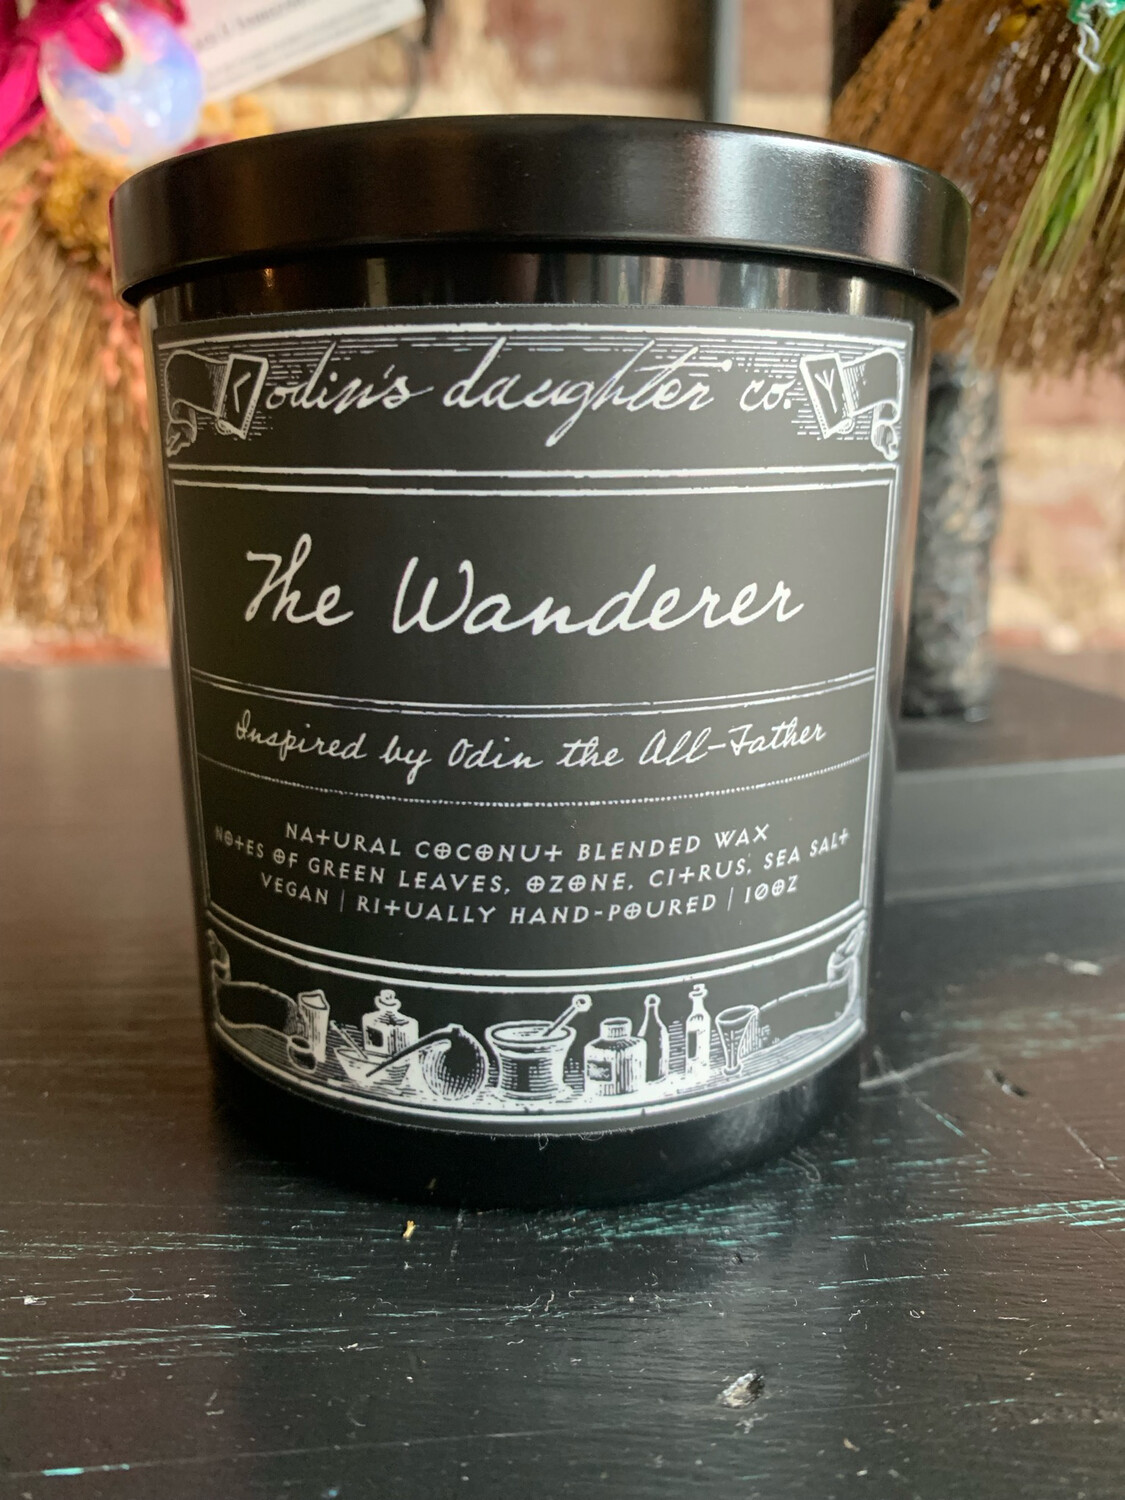 Odin’s Daughter Candle - The Wanderer